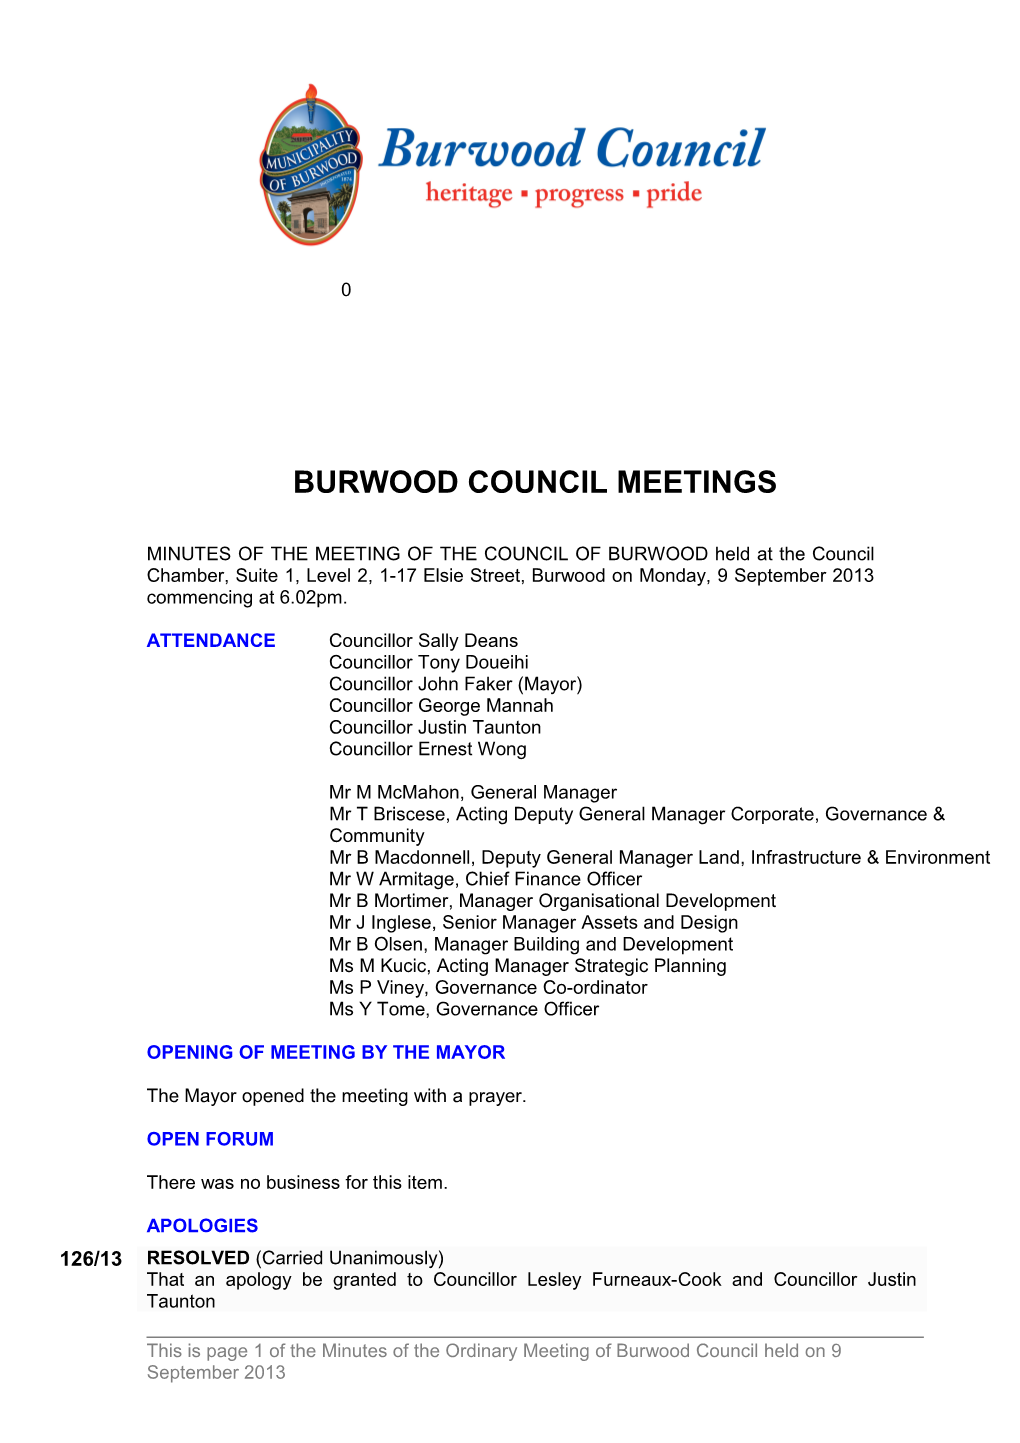 Pro-Forma Minutes of Burwood Council Meetings - 9 September 2013